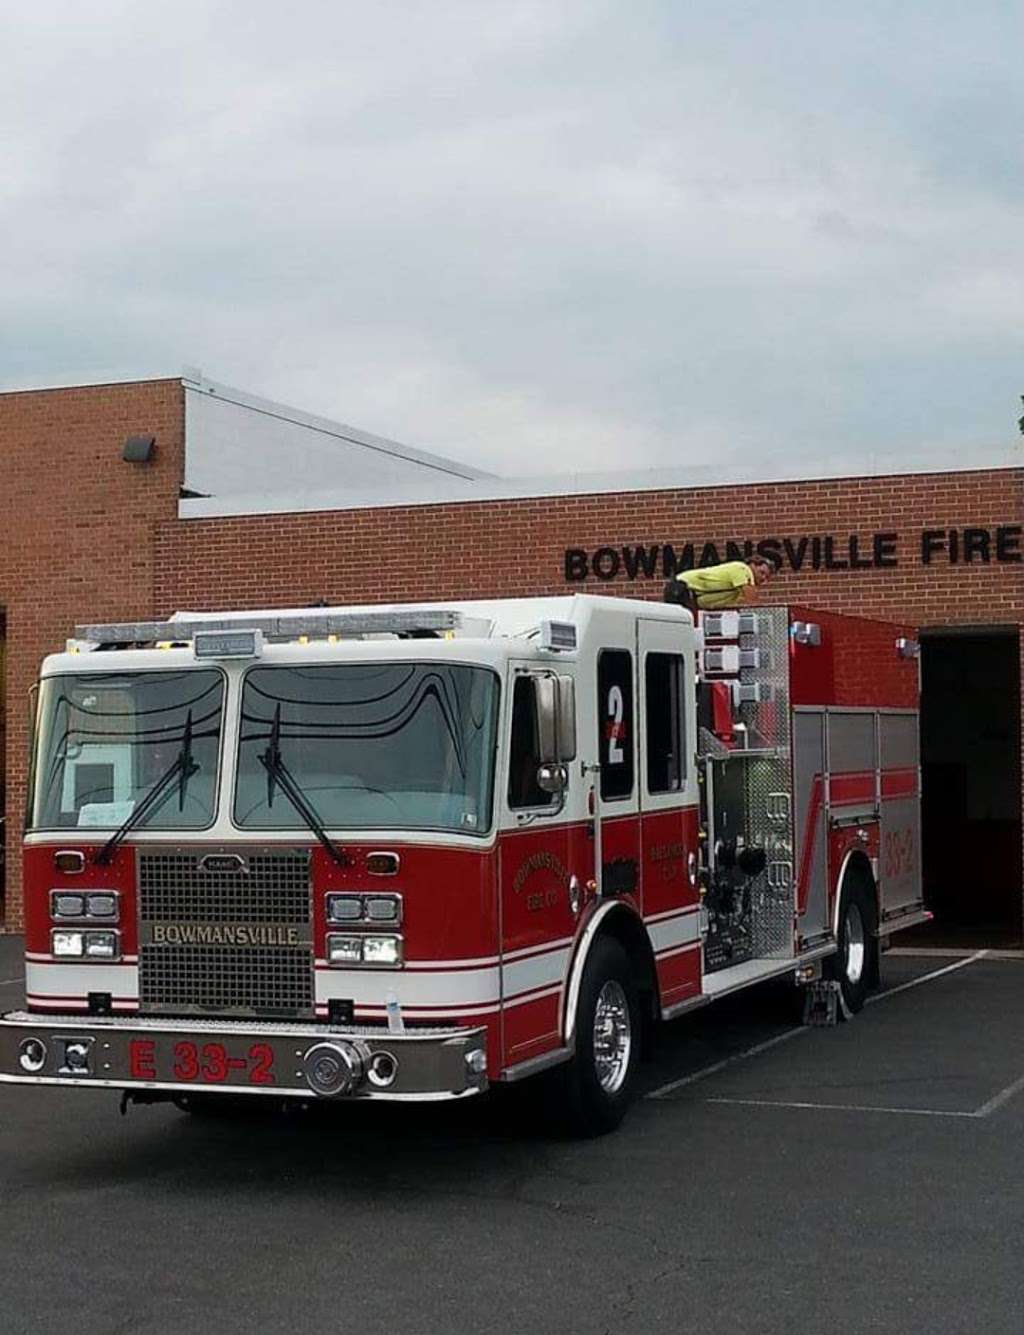 Bowmansville Volunteer Fire Company Station 33 | 146 W Maple Grove Rd, Bowmansville, PA 17507 | Phone: (717) 445-6293